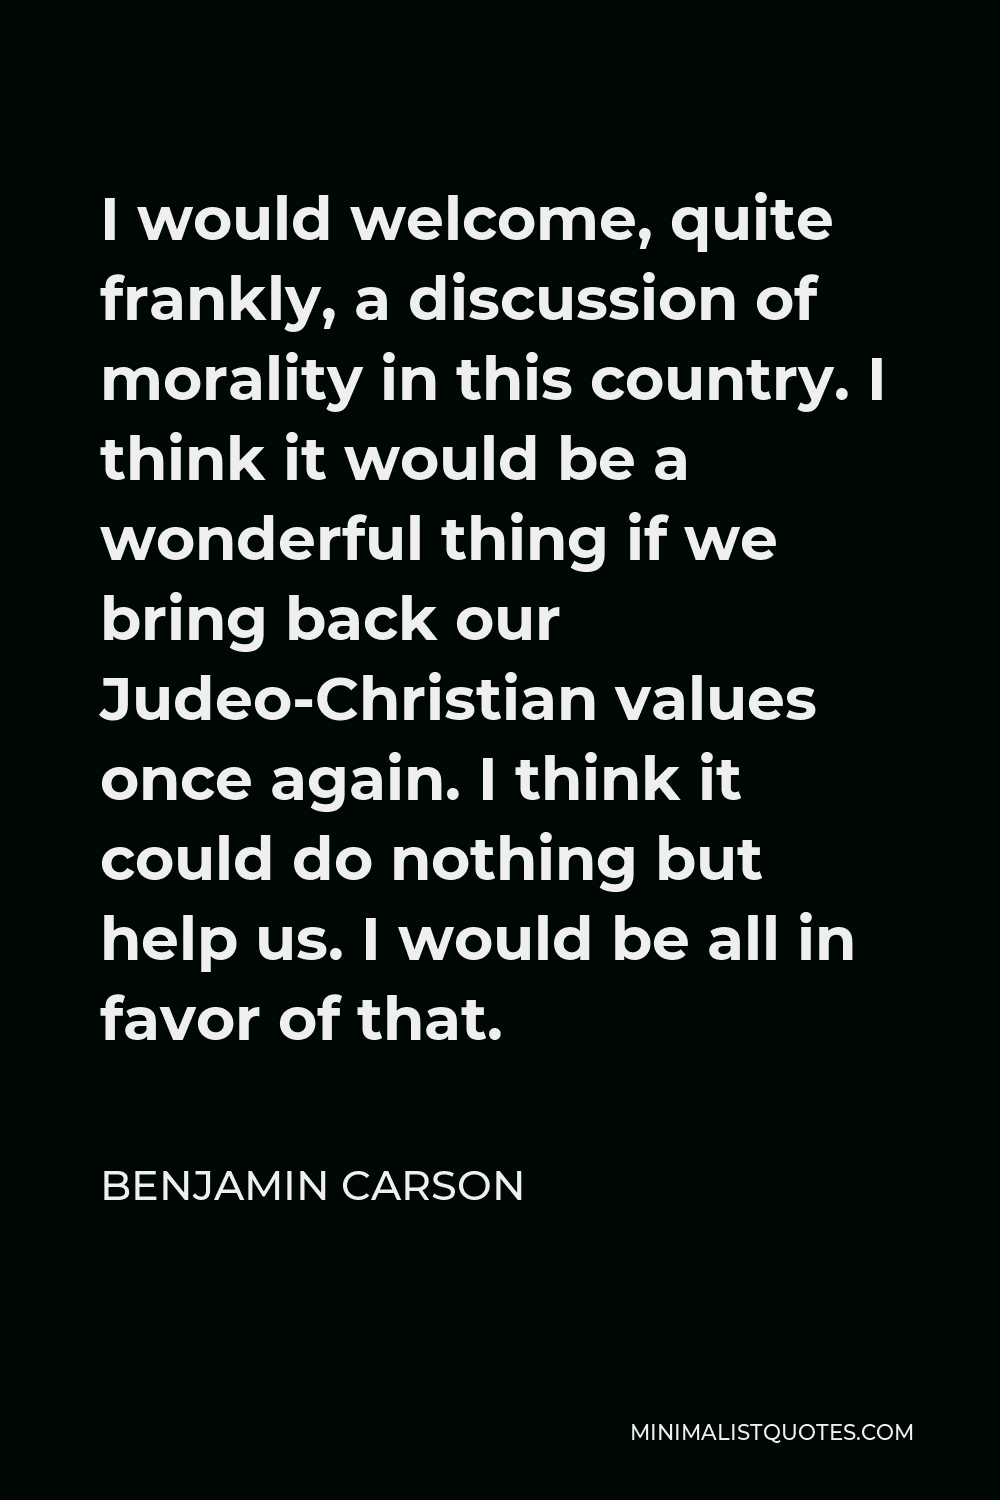 Benjamin Carson Quote - I would welcome, quite frankly, a discussion of morality in this country. I think it would be a wonderful thing if we bring back our Judeo-Christian values once again. I think it could do nothing but help us. I would be all in favor of that.